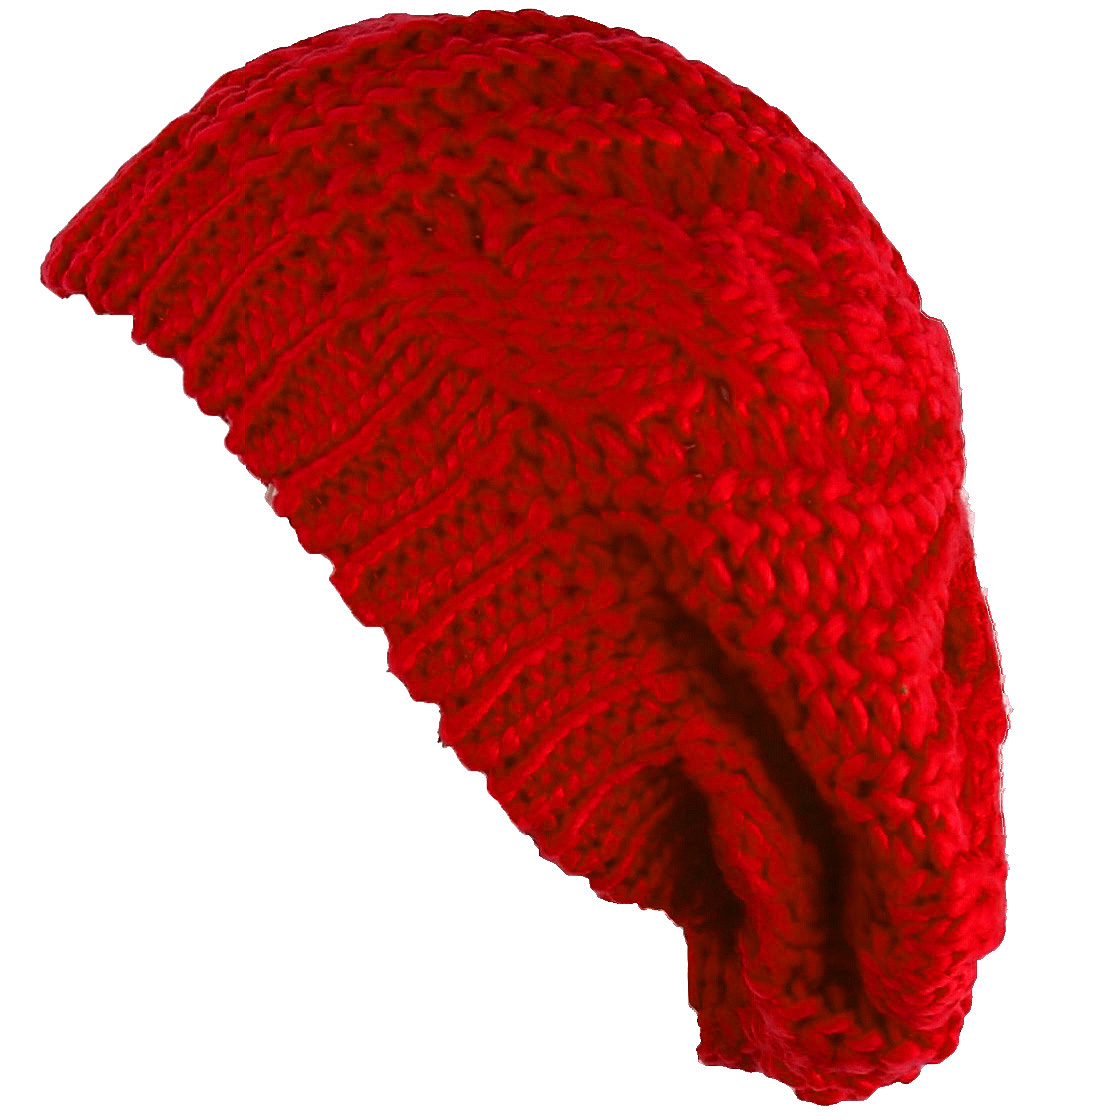 FS Hot New Women Baggy Beret Chunky Knit Knitted Braided Beanie Hat Ski Cap Red